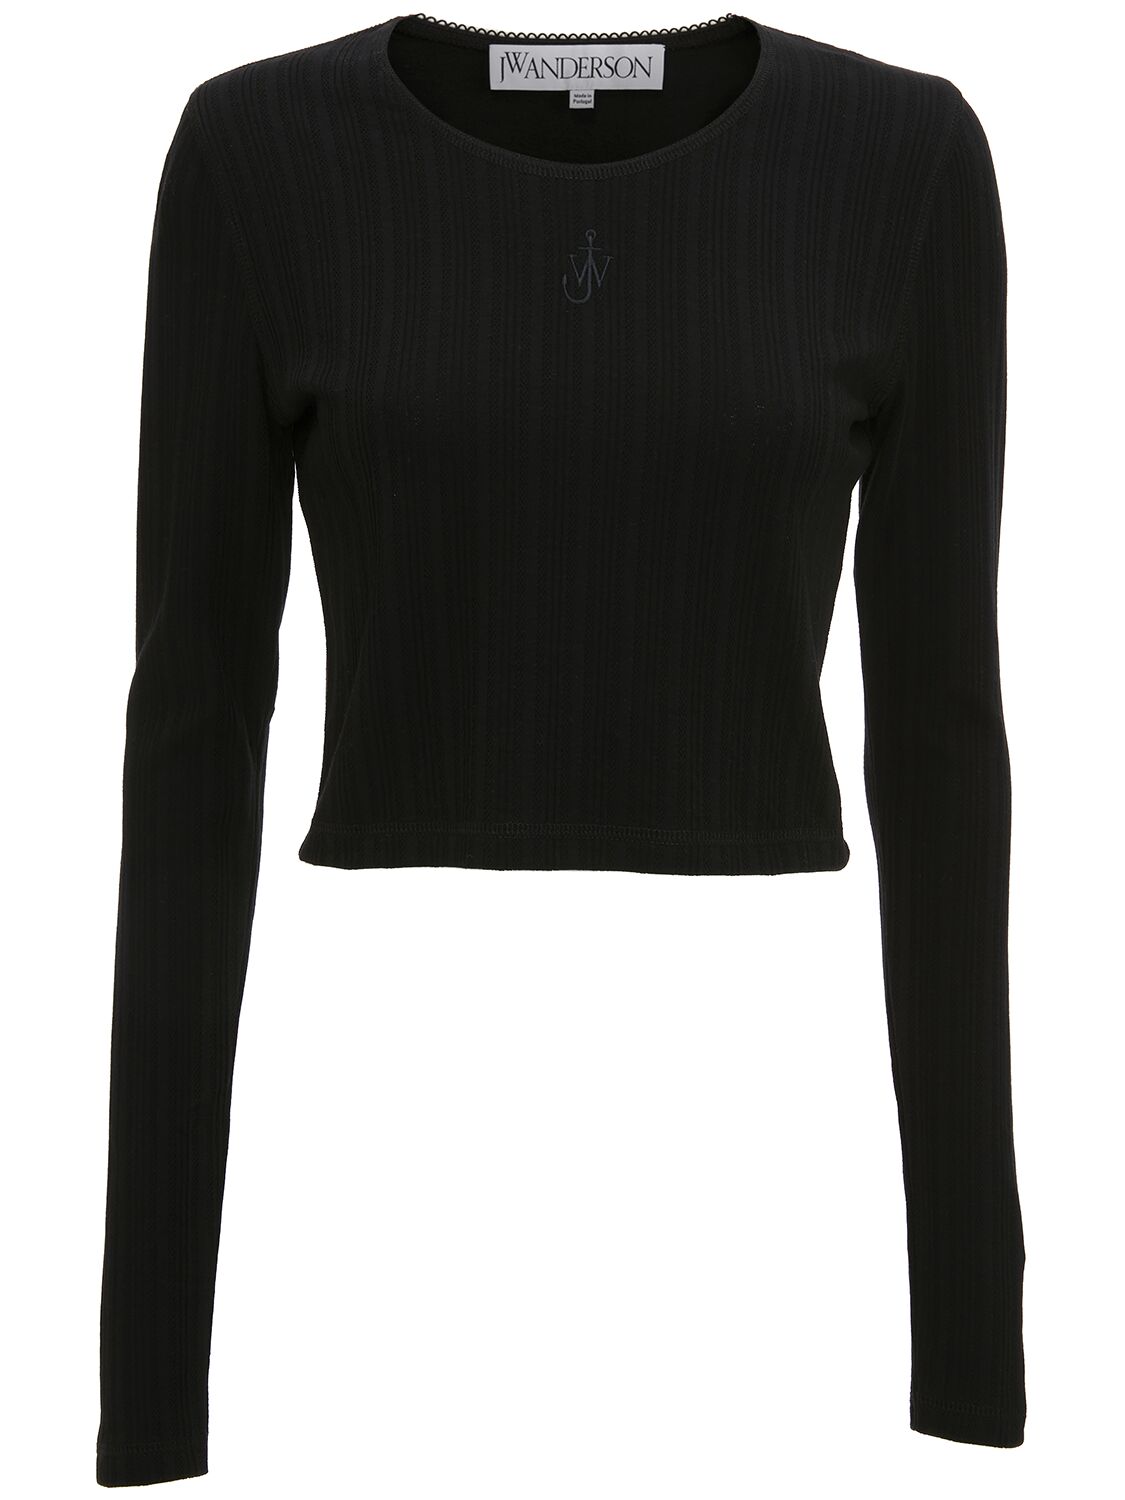 Jw Anderson Anchor Embroidery Cropped L/s Top In Black